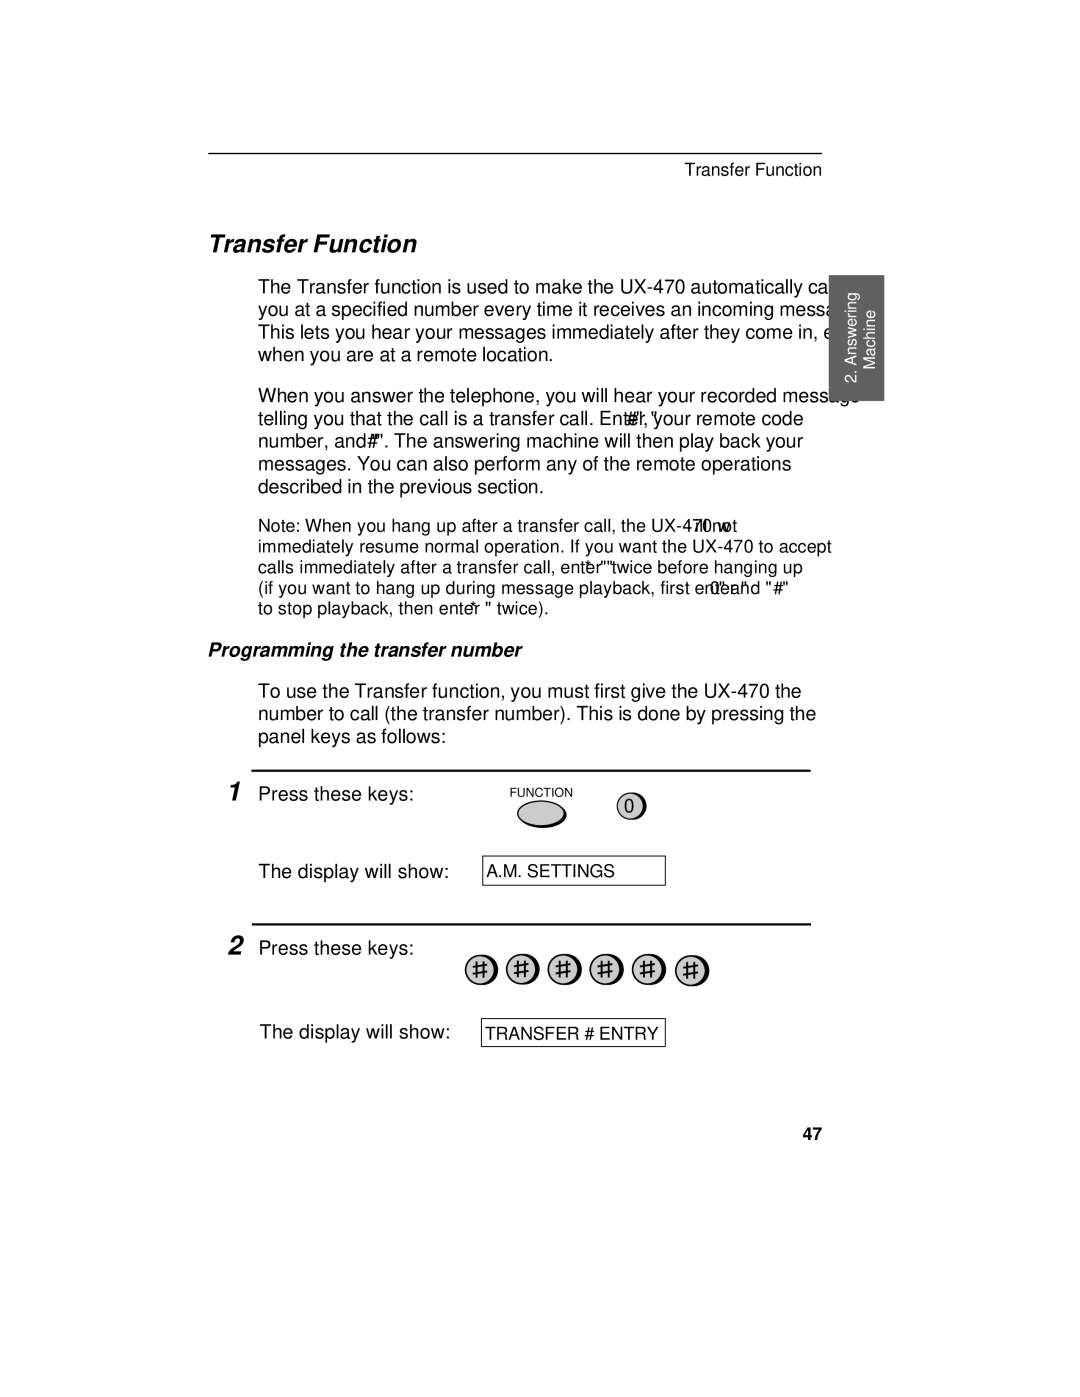 Sharp UX-470 operation manual Transfer Function, Programming the transfer number 